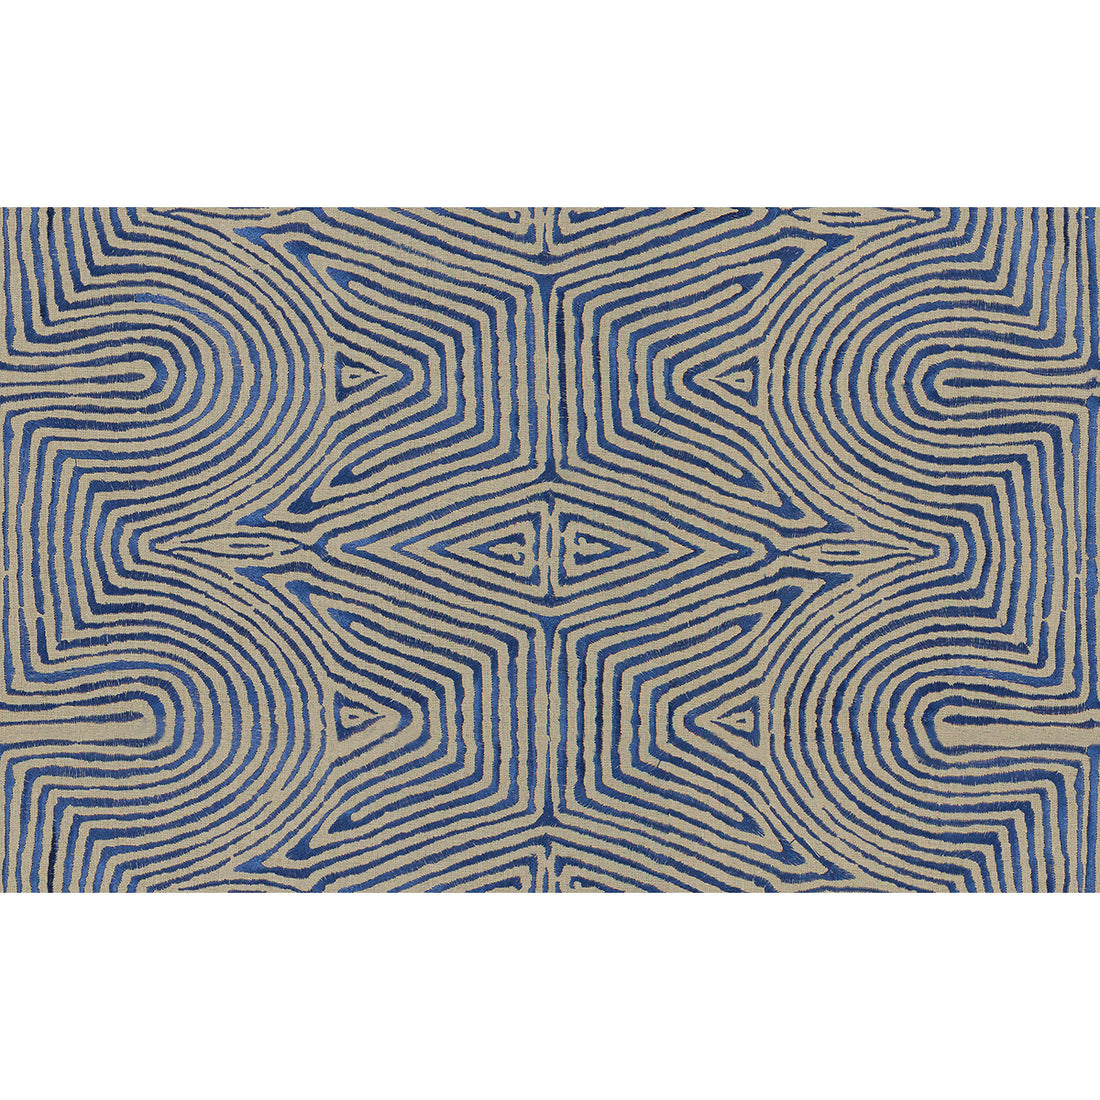 Julia Emb fabric in flax/blue color - pattern GWF-3708.1650.0 - by Lee Jofa Modern in the Prism collection